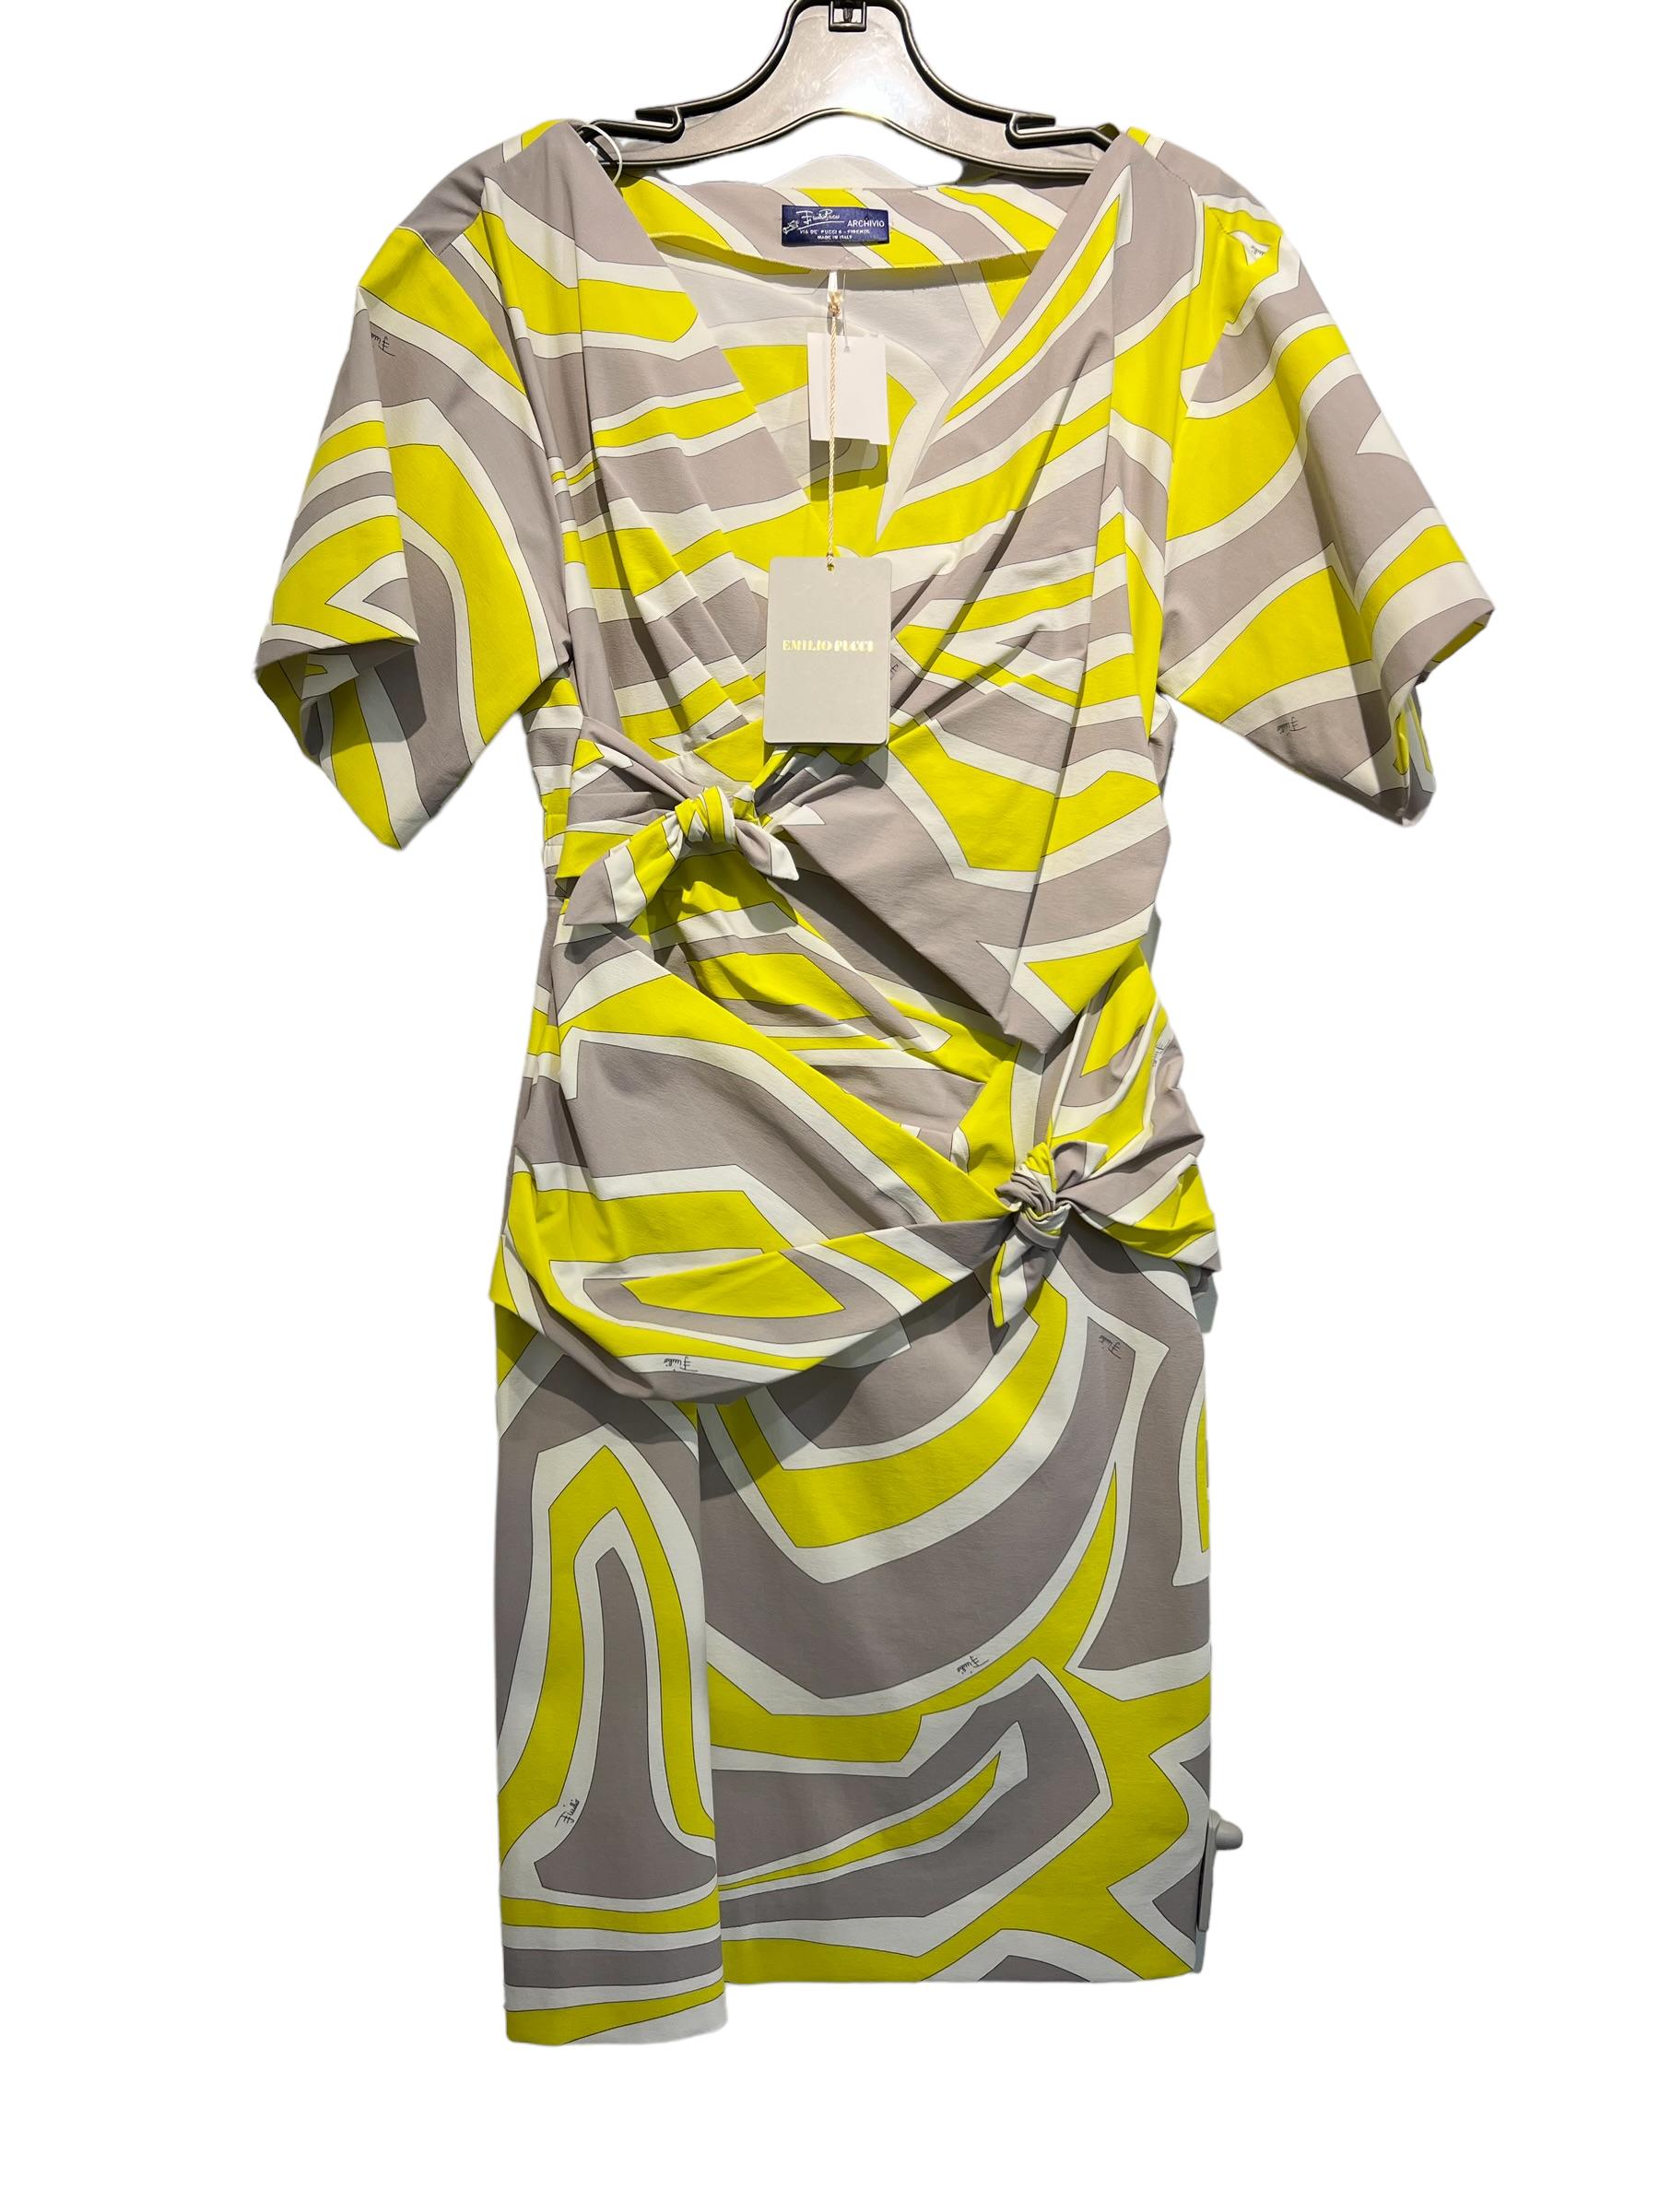 Ensure that your day-to-day style is as glamorous as you are with this Pucci-Print Dress from Emilio Pucci. From 2000´s Collection Designed to Inspire the Imagination, This Pattern Will add a Dynamic Touch to Your Wardrobe. You Make Great Pieces